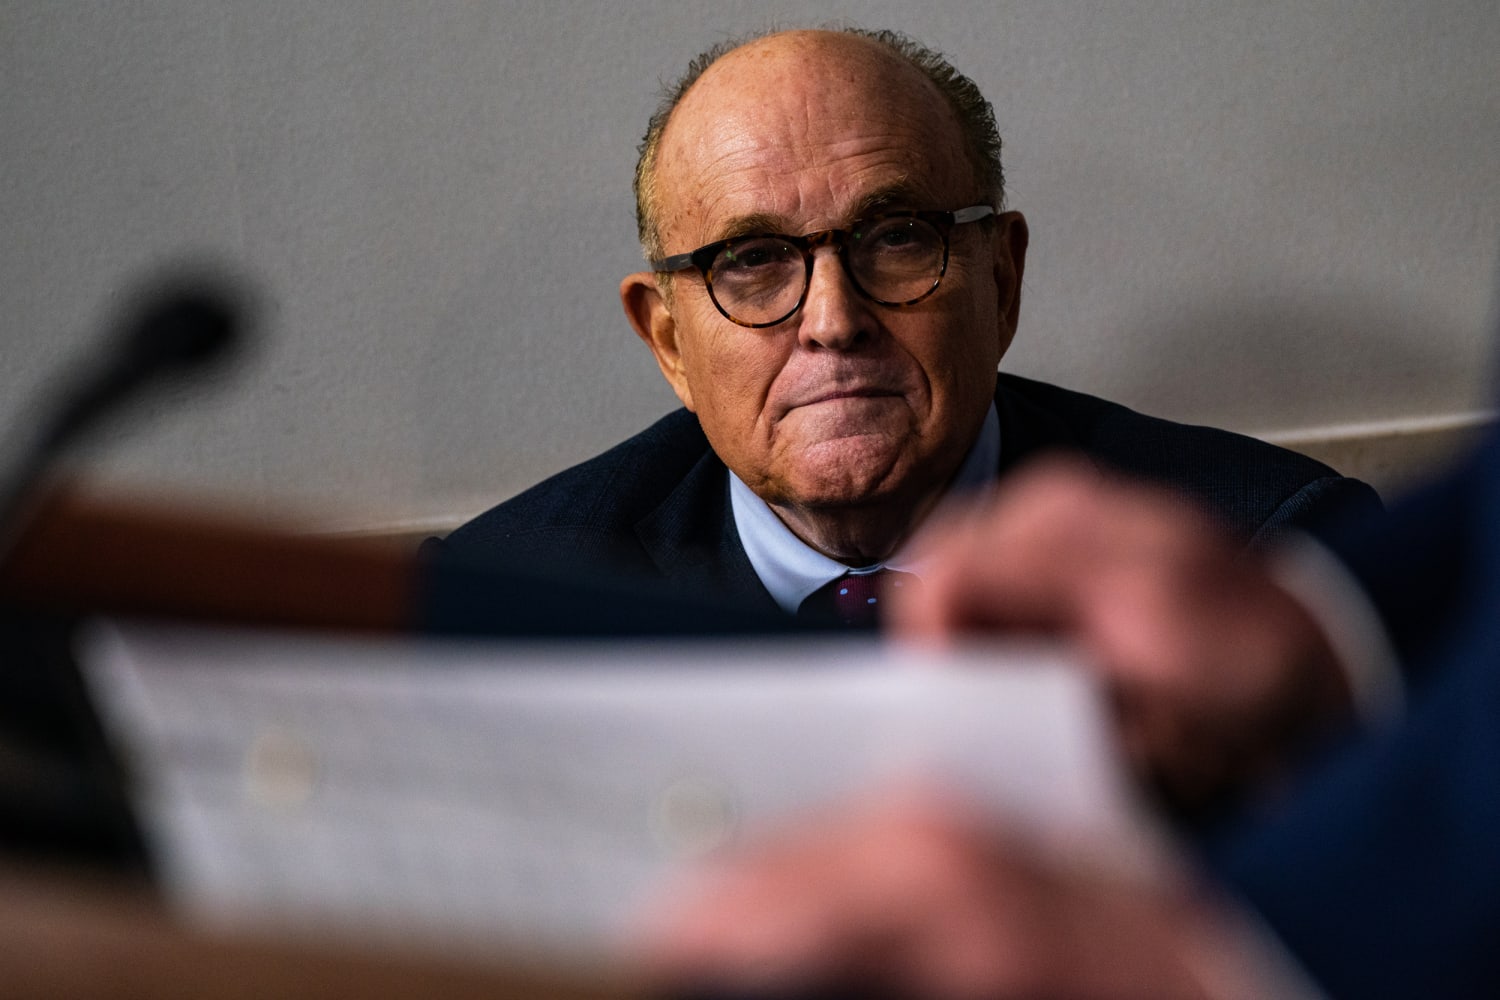 Jan. 6 committee subpoenas Giuliani, 3 other Trump lawyers, accuses them of pushing election lies